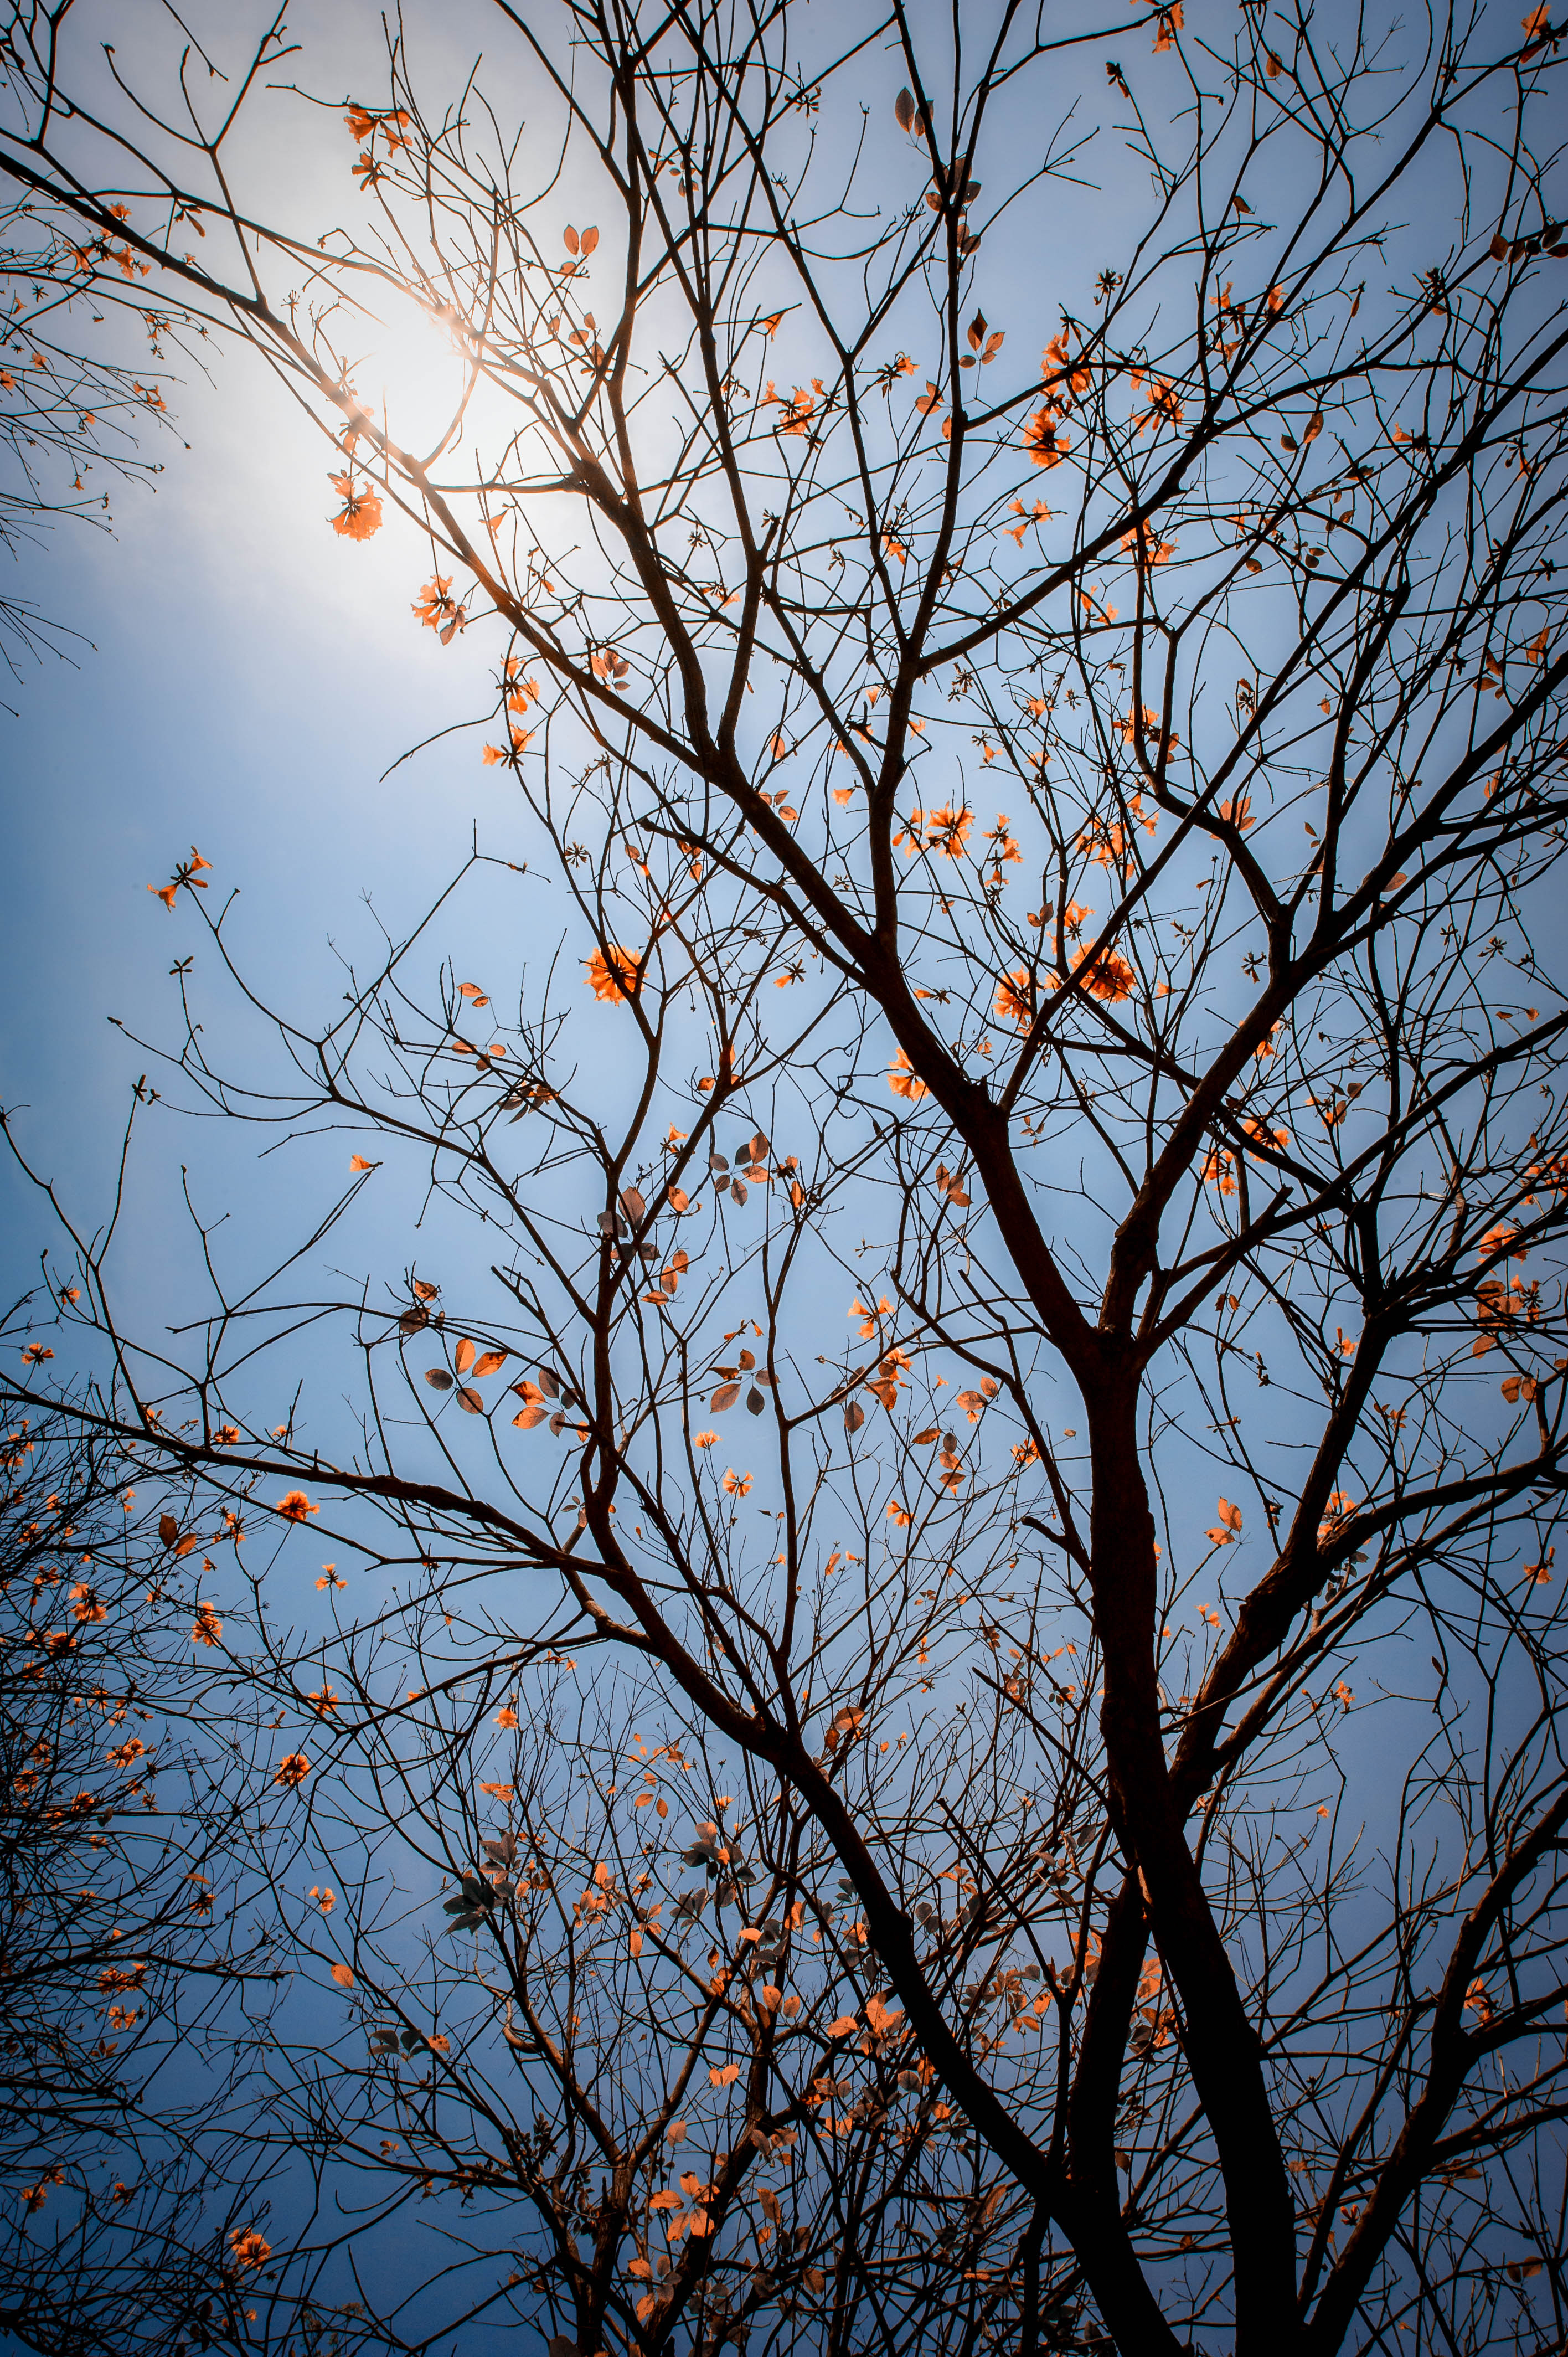 Free HD sky, nature, flowers, leaves, wood, tree, branches